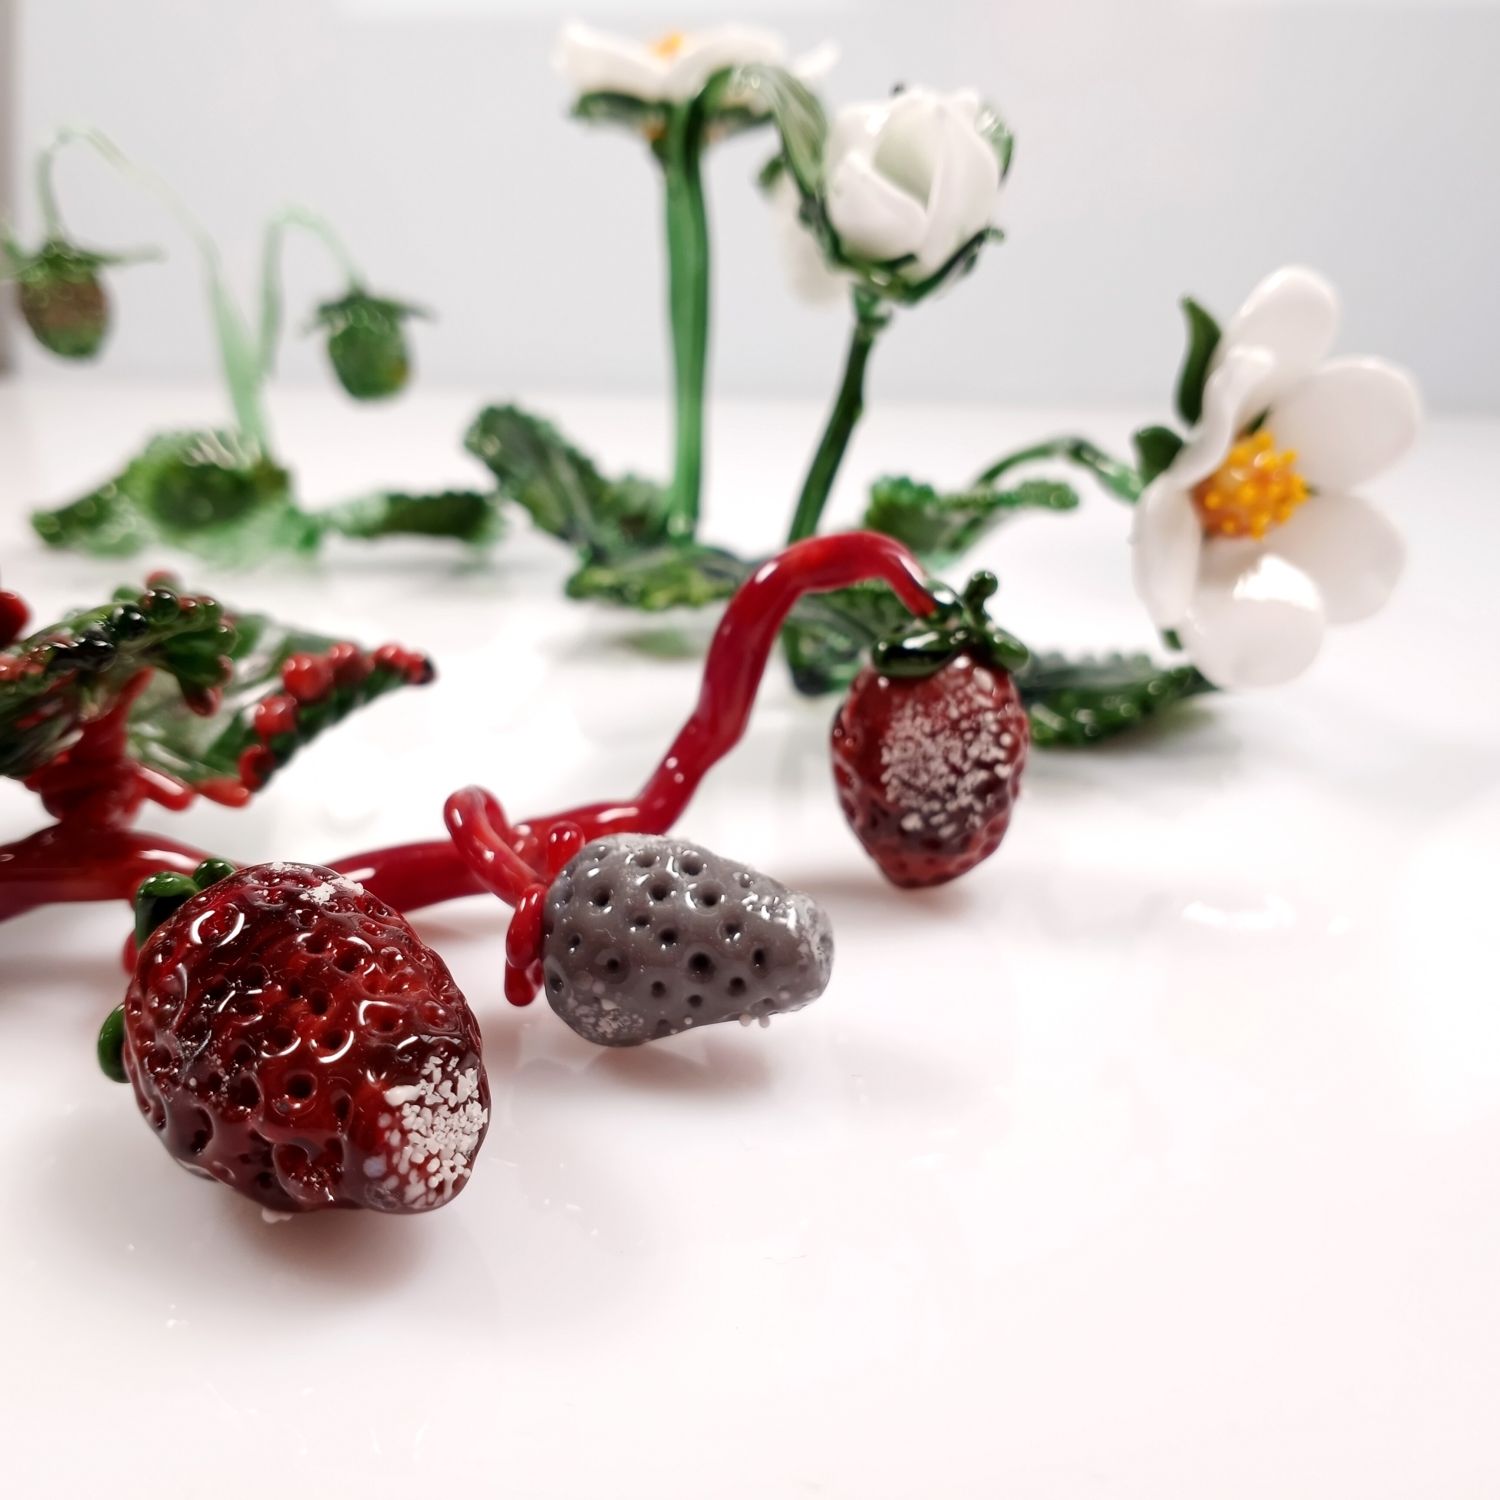 Nadia Tasci: Strawberry Patch – Not For Sale Product Image 2 of 3